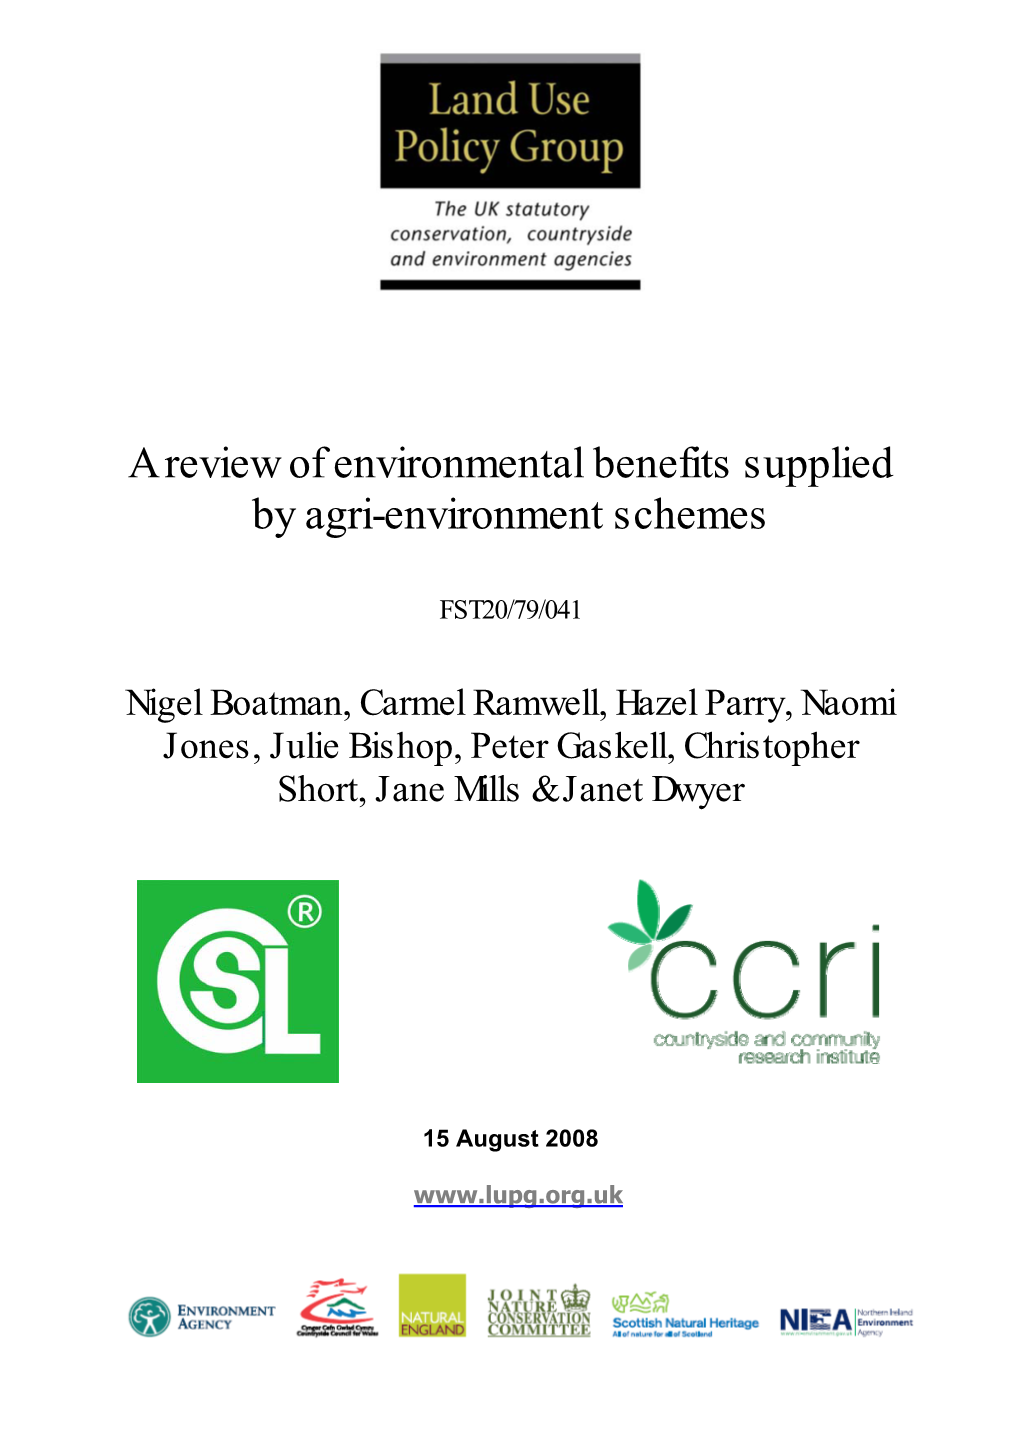 A Review of Environmental Benefits Supplied by Agri-Environment Schemes